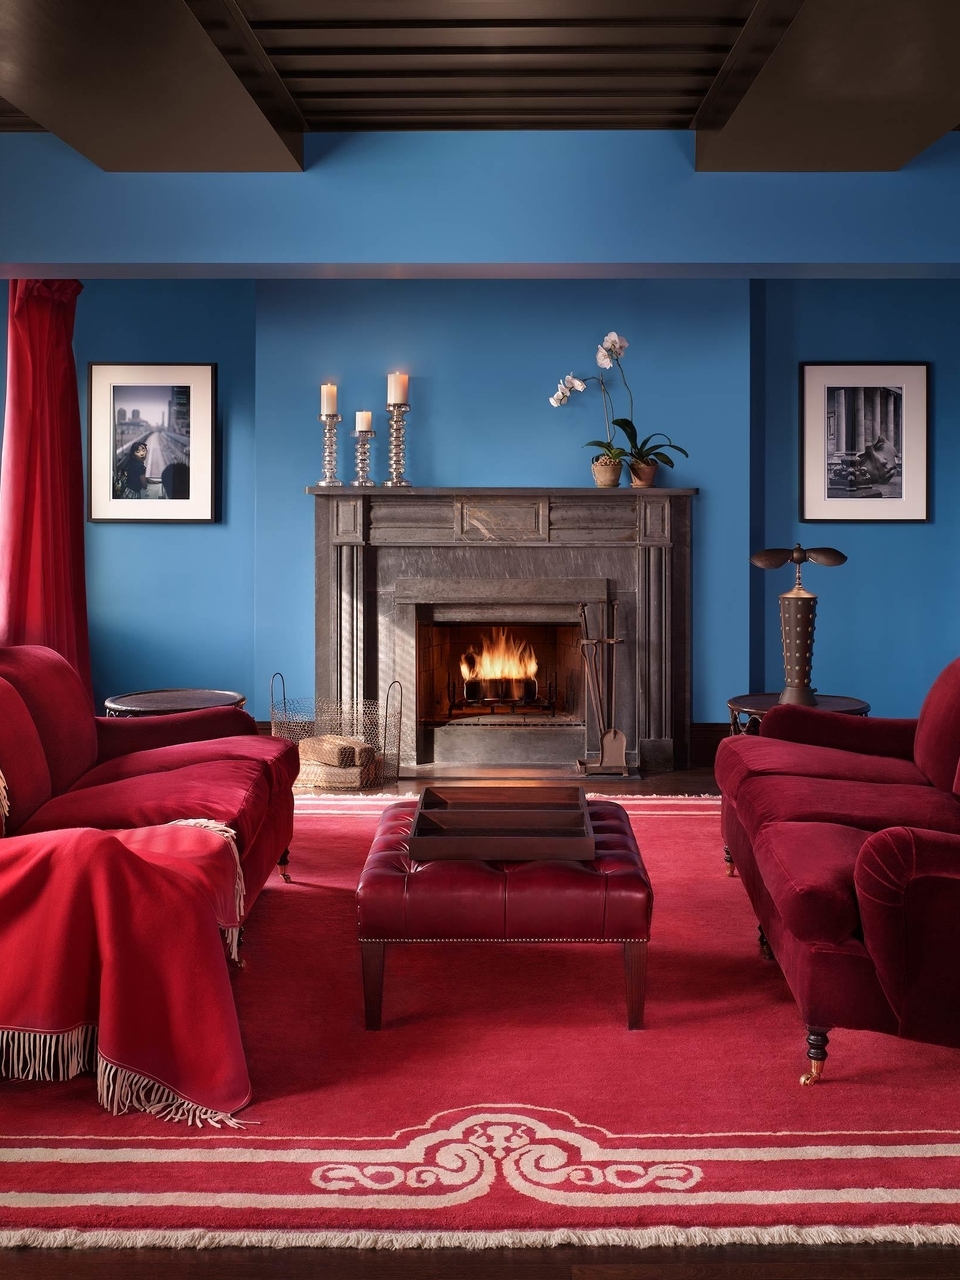 Image: Living room, red color, fireplace, floor lamp, sofa